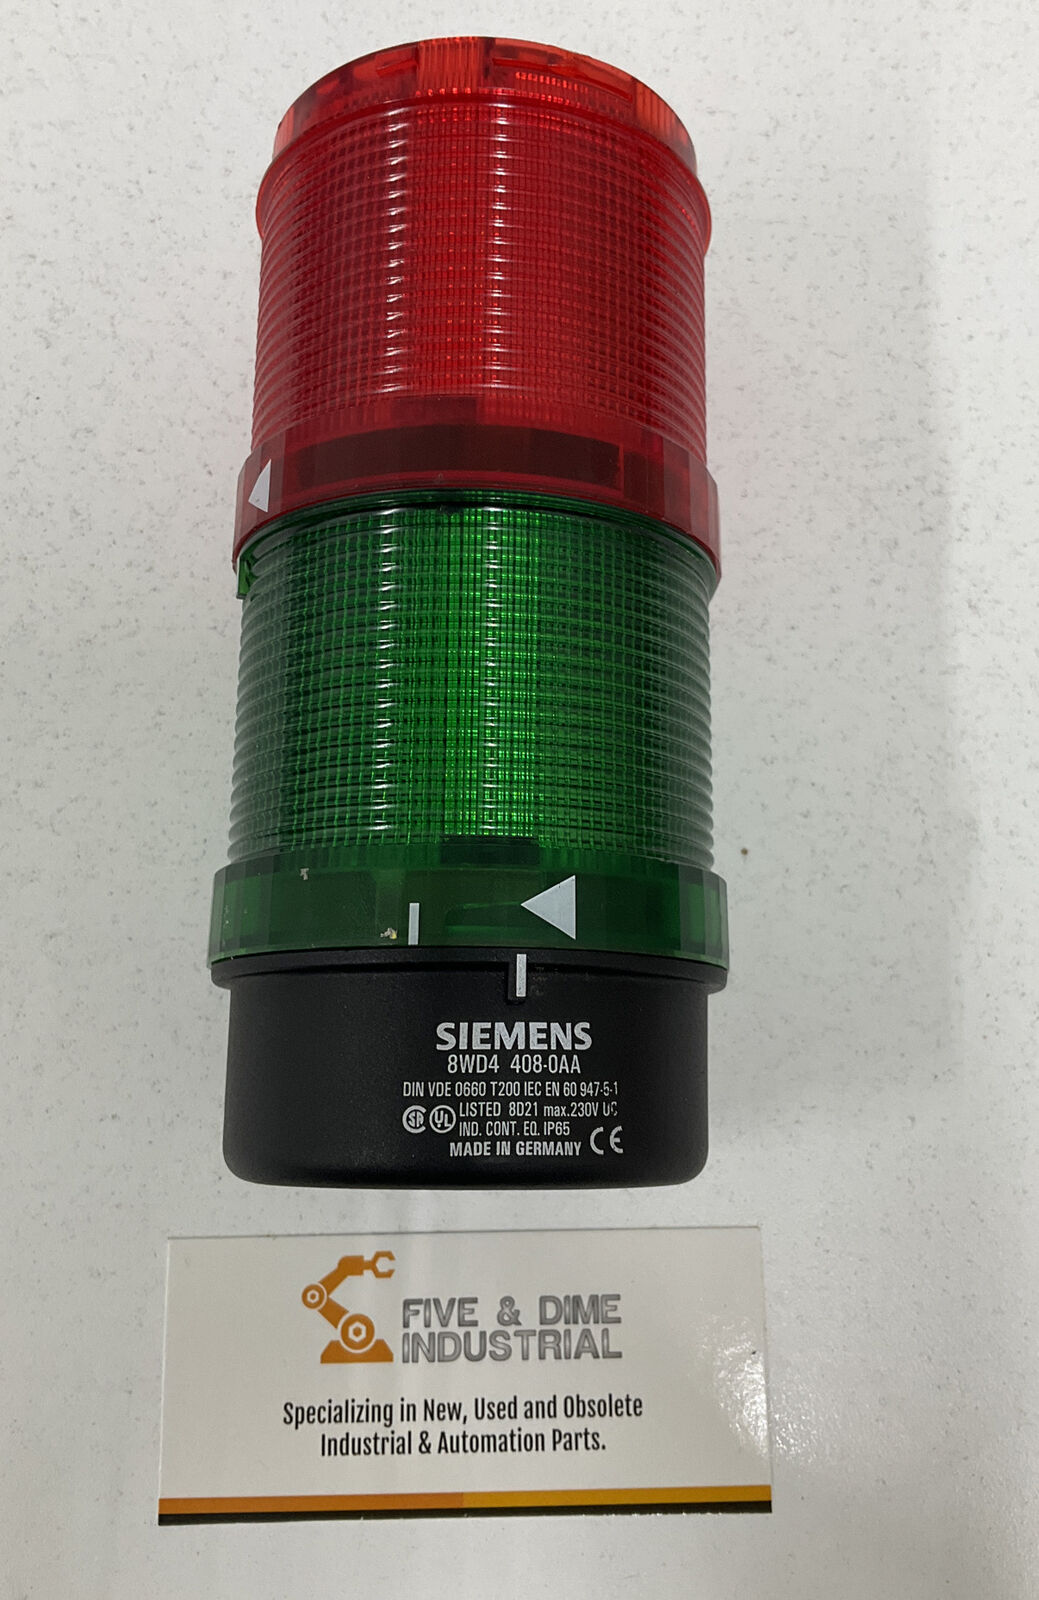 Siemens 8WD4 408-0AA Safety Stack Light Base w/ Red & Green Lenses (CL197)